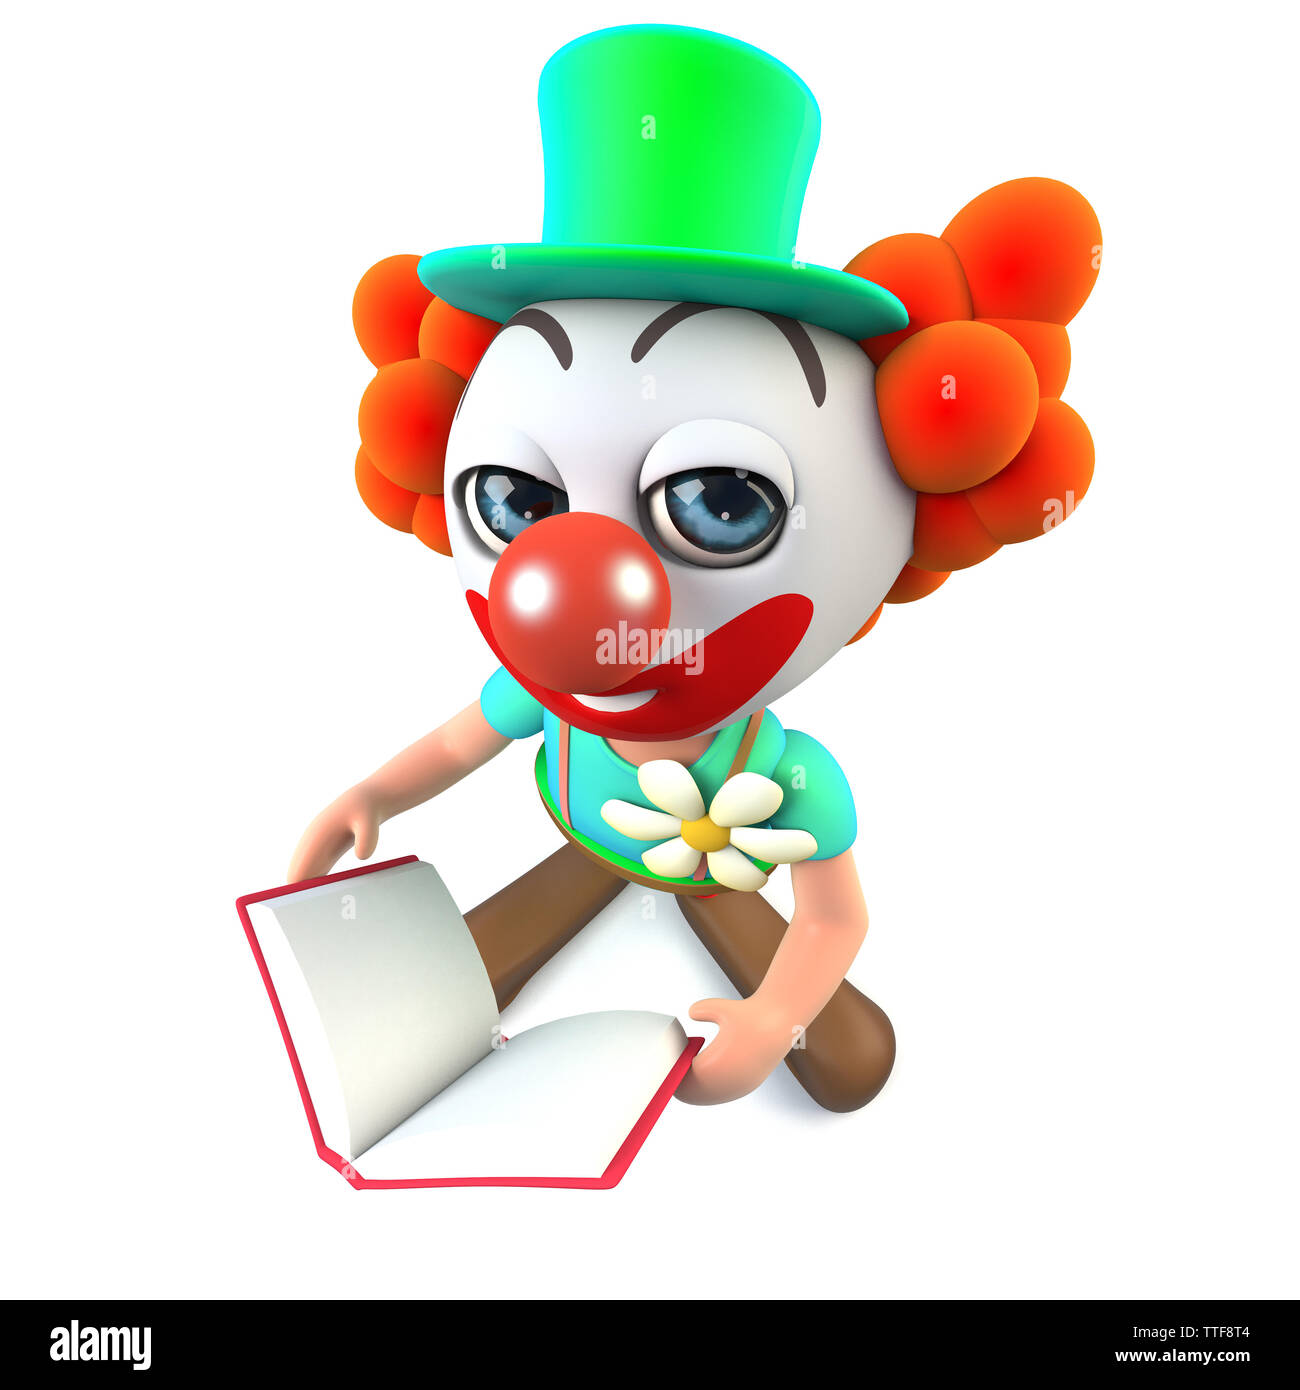 3d render of a funny cartoon clown character reading a book Stock Photo